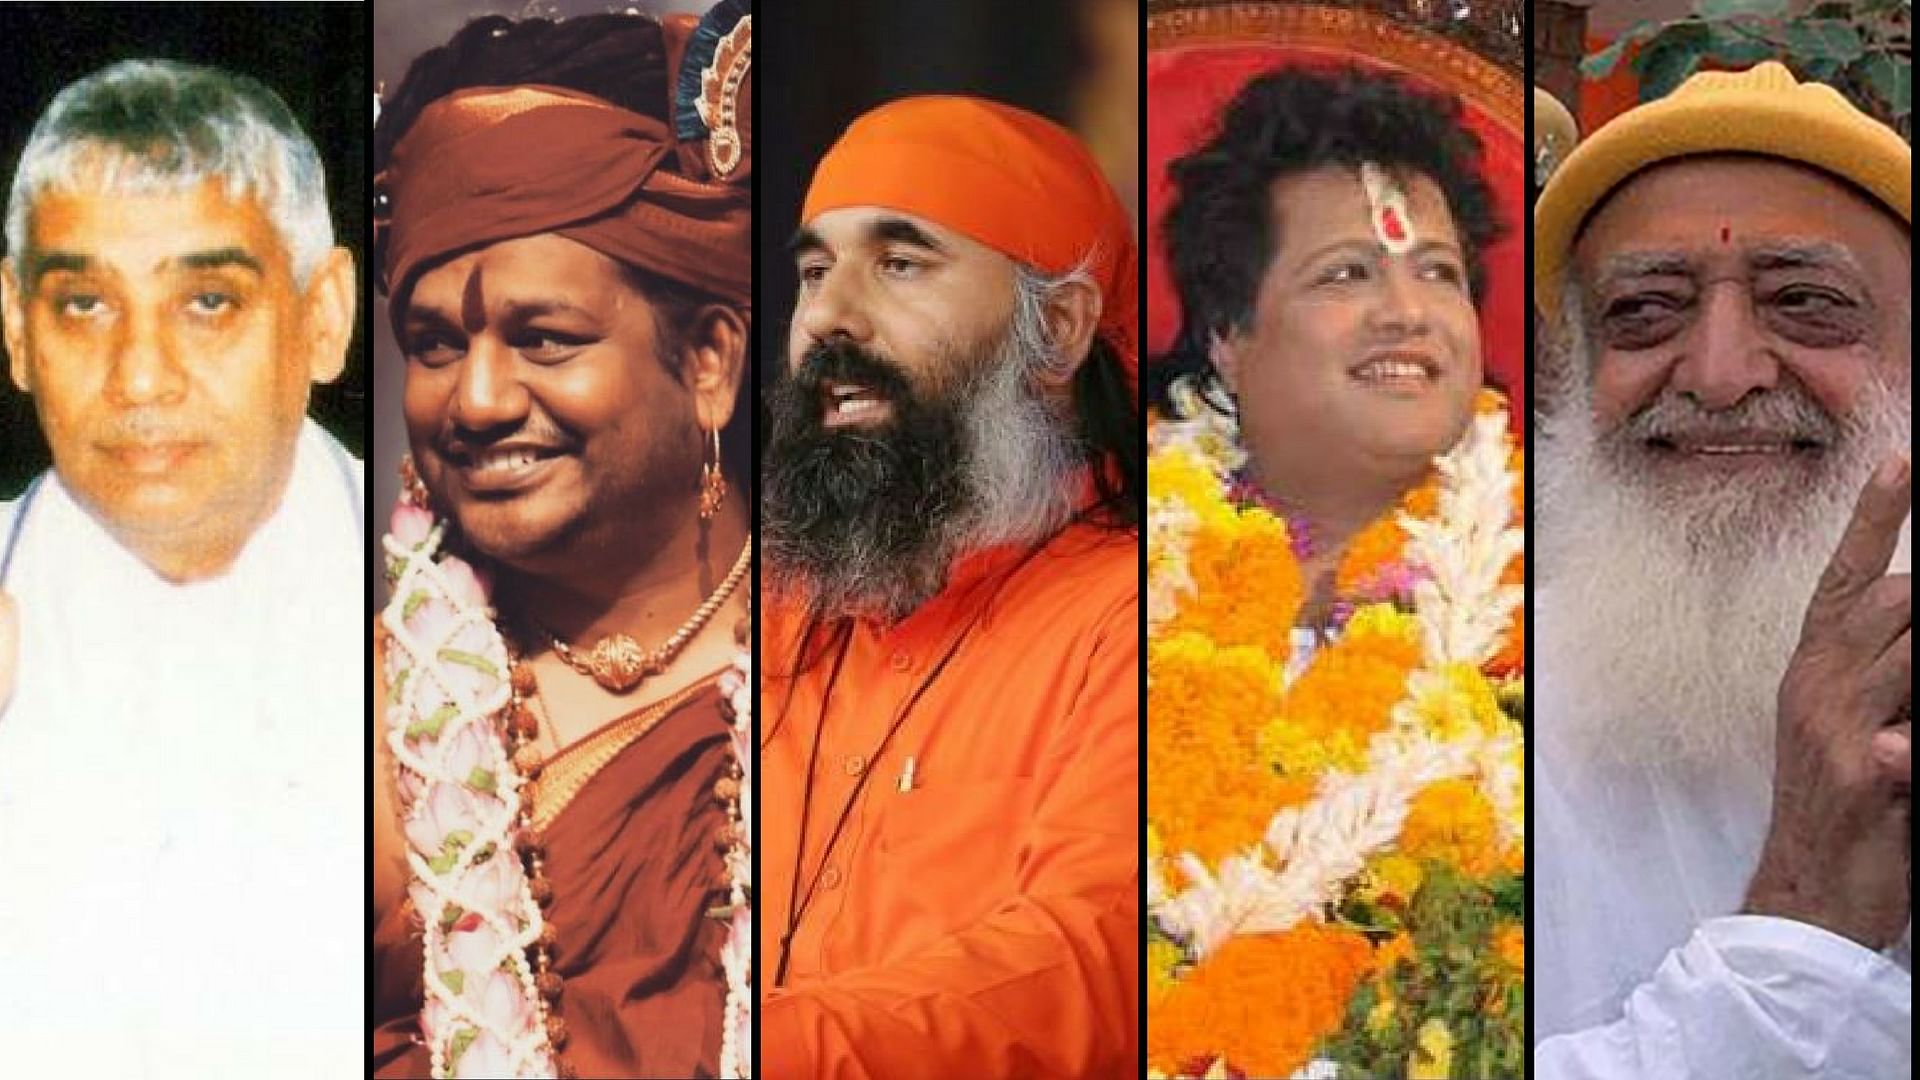 

We take a look at the times violence has broken out in the name of India’s many godmen.